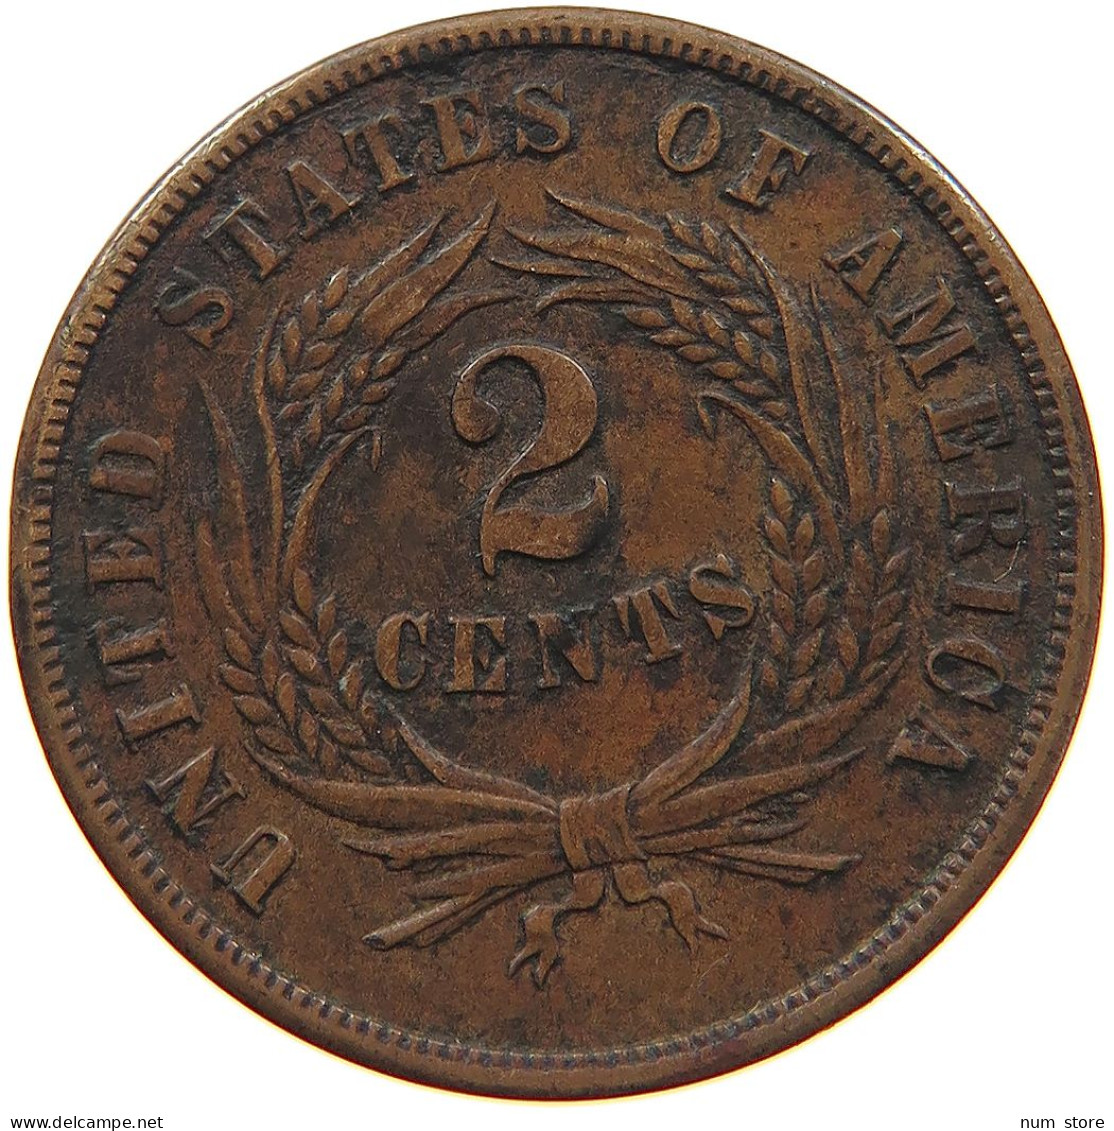 UNITED STATES OF AMERICA TWO CENTS 1864  #t143 0421 - 2, 3 & 20 Cent